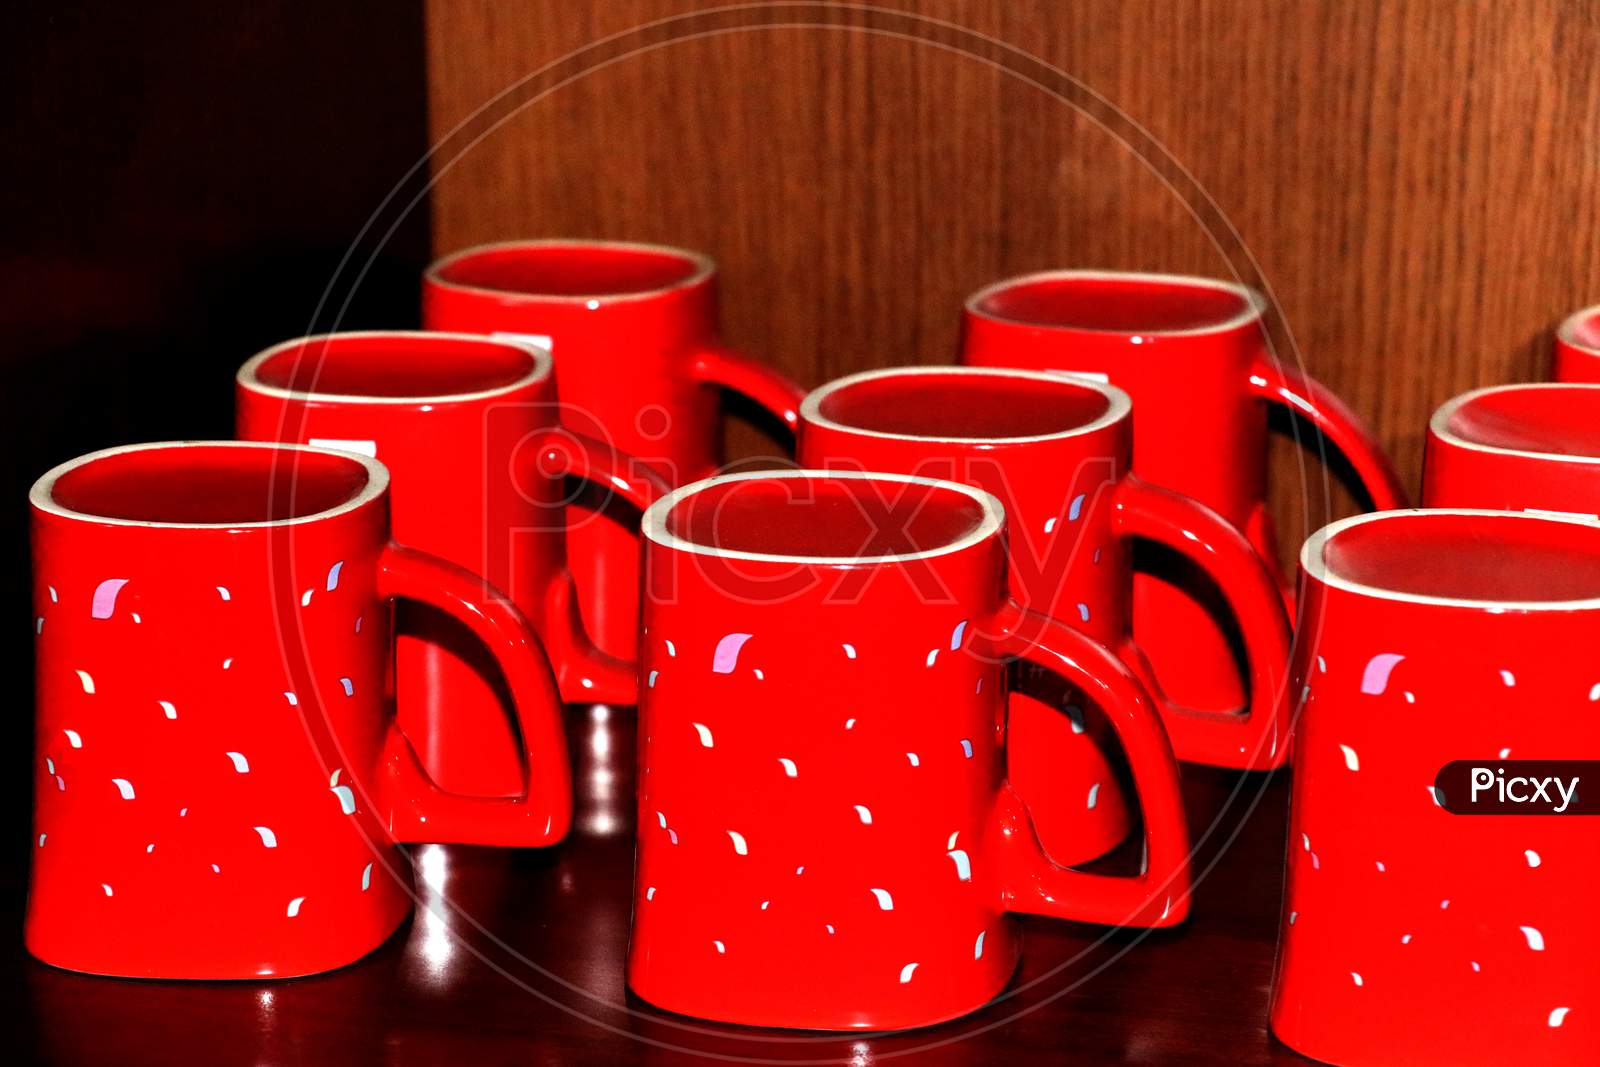 Red color coffee mug for the refreshment is waiting at showcase